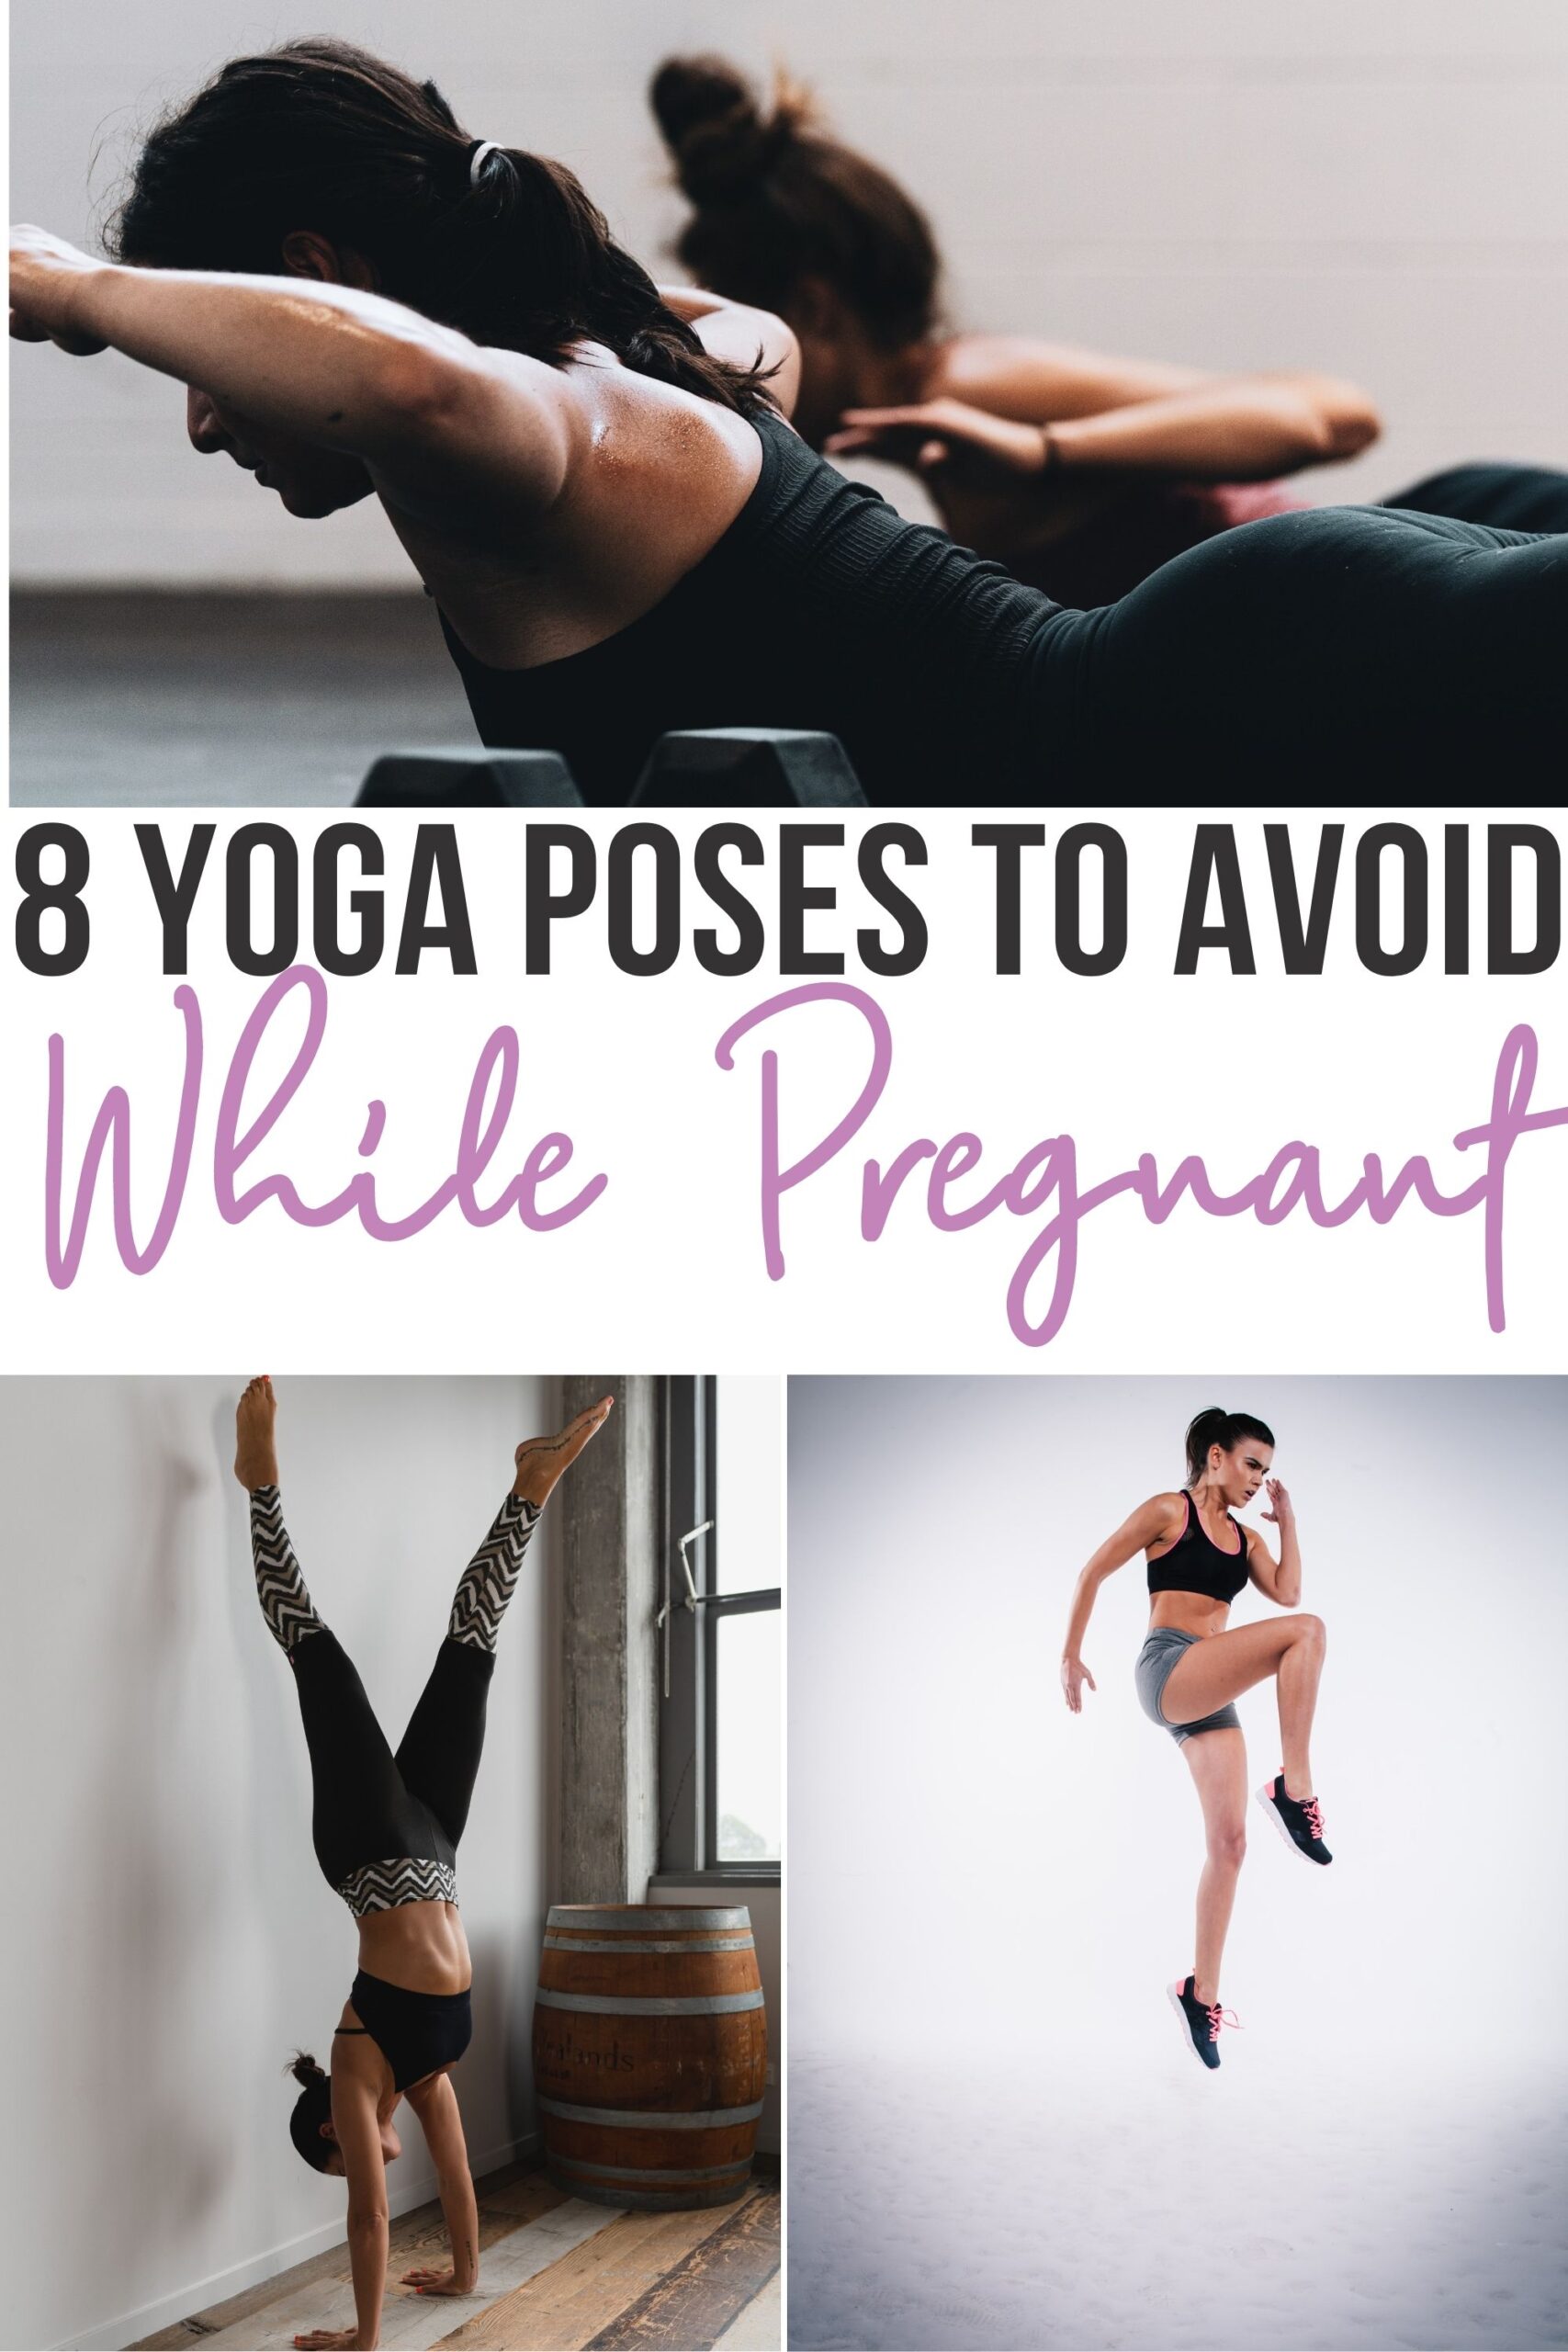 A Prenatal Yoga Sequence for Your Third Trimester